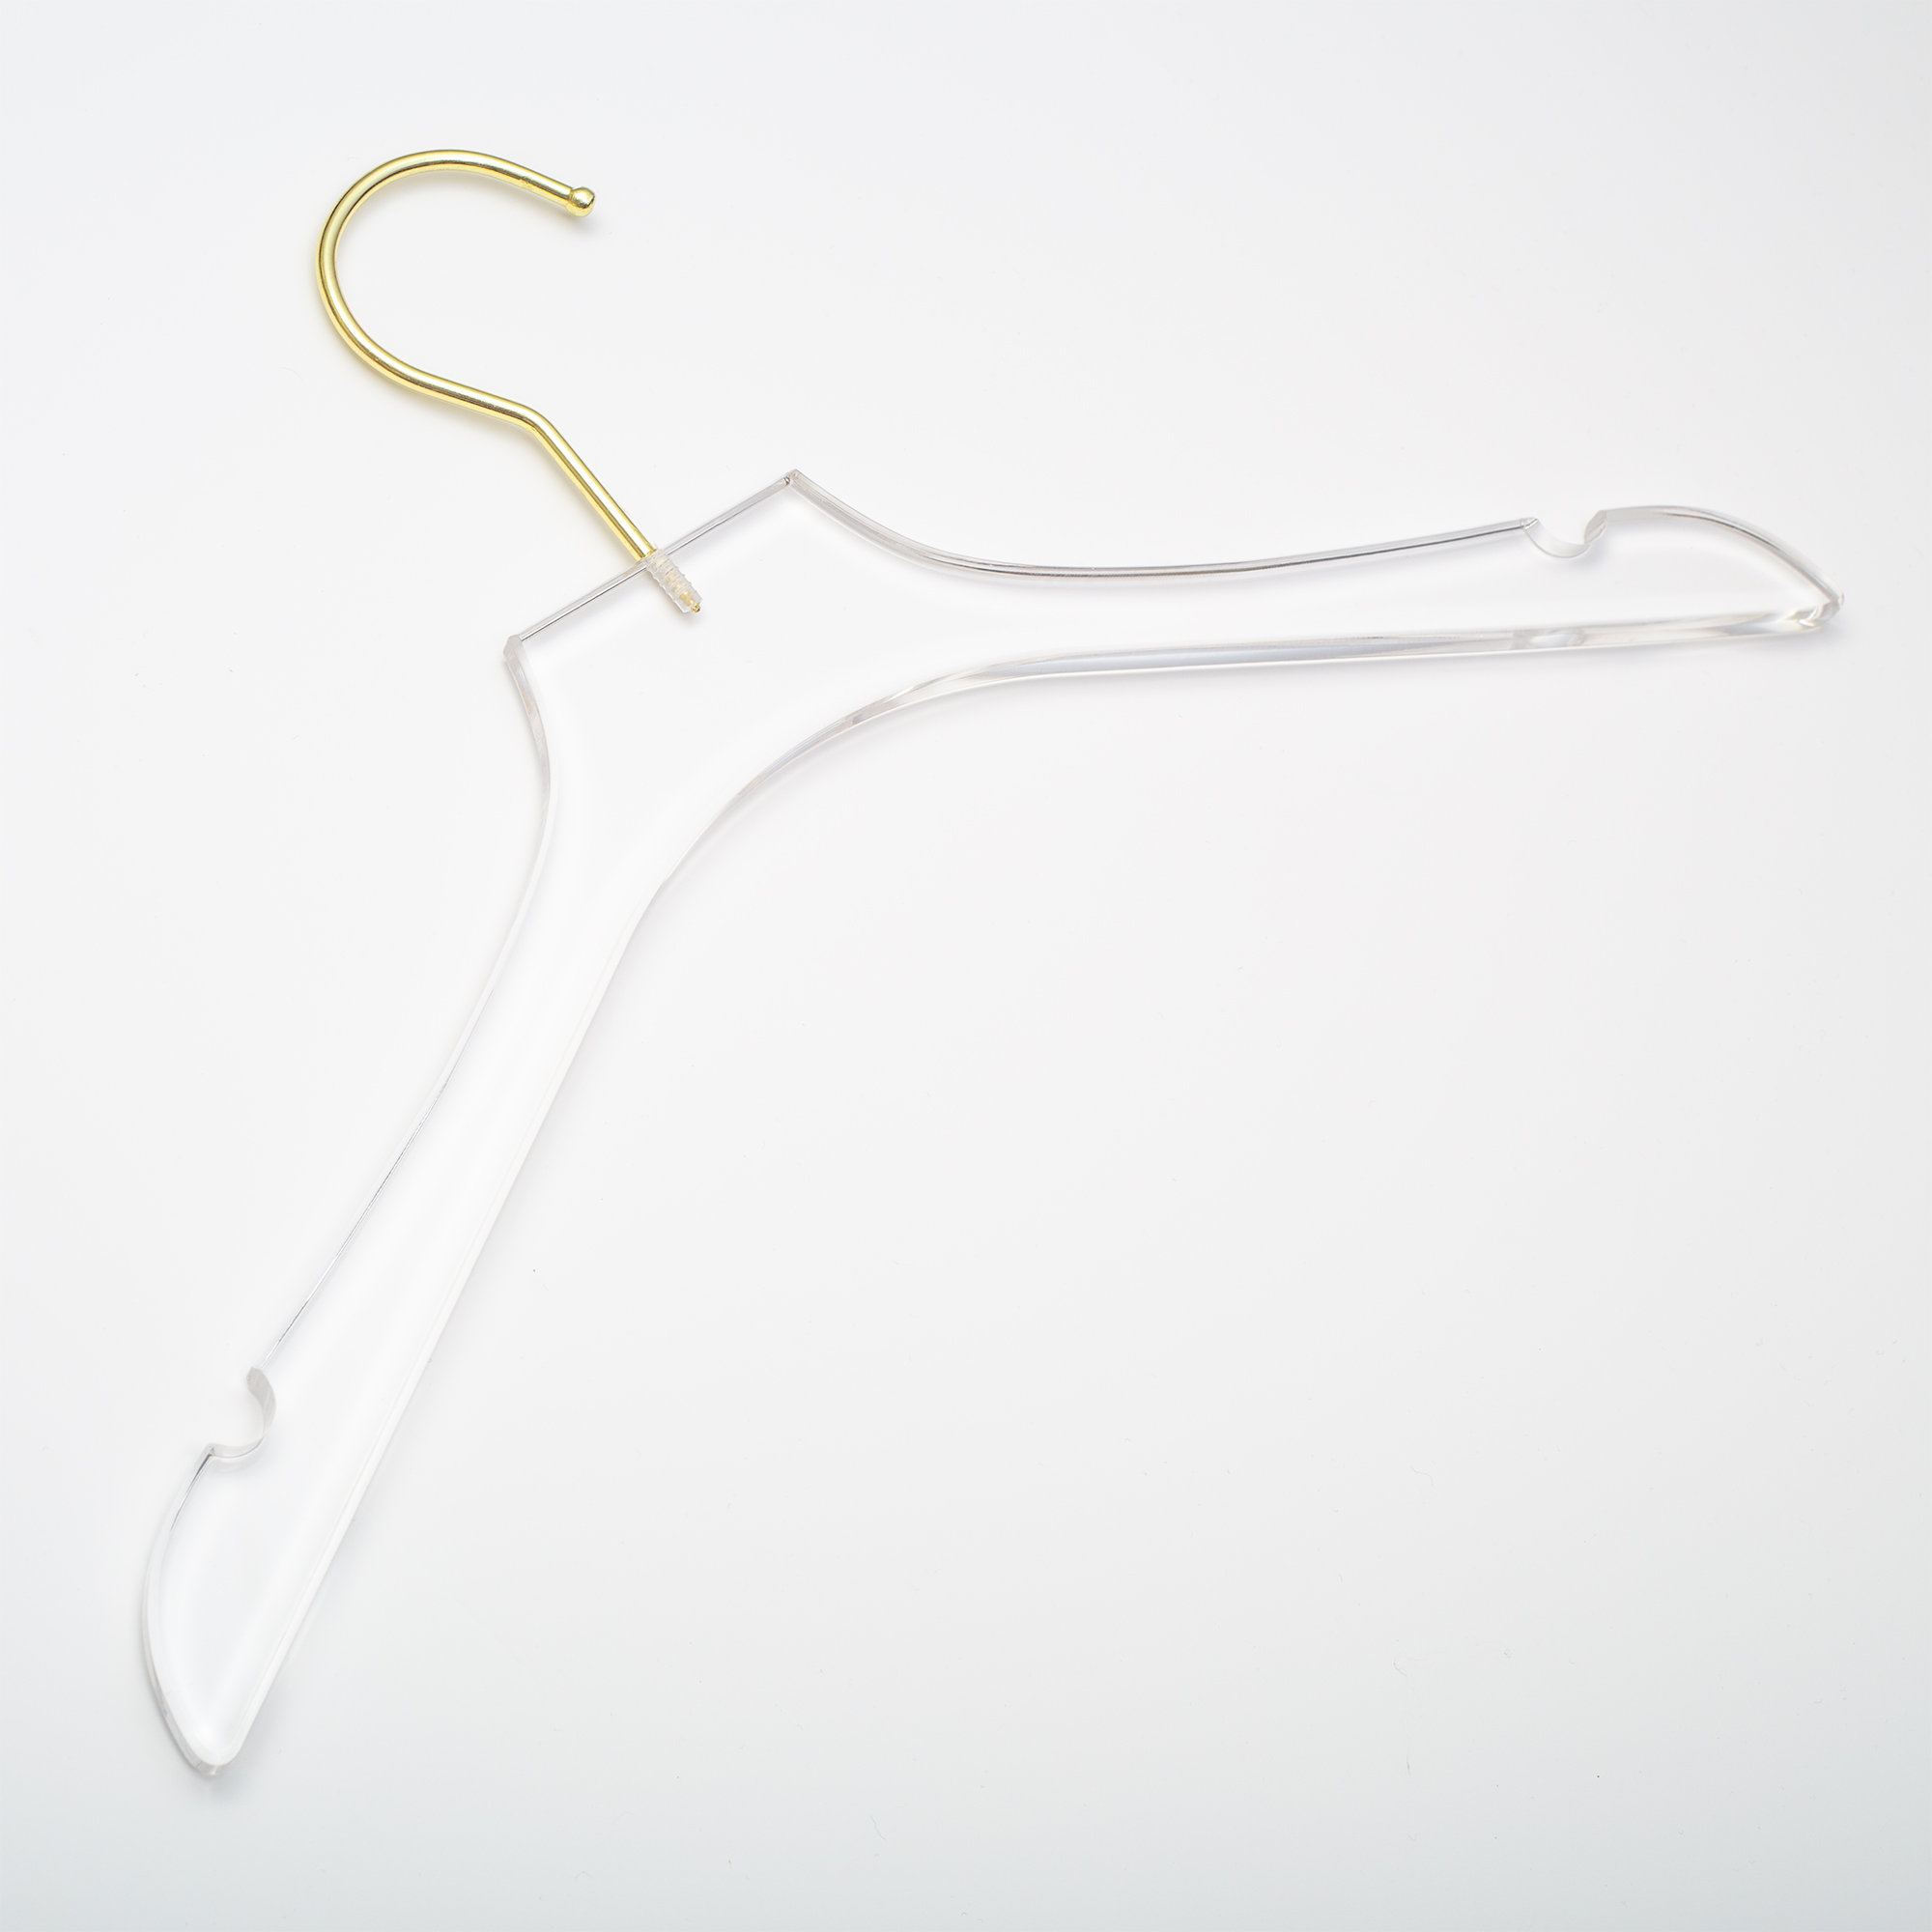 10 PCS Home Clothes Hangers Standard Plastic Thick Laundry and Closet Use  Hanger Ultra Thin Wardrobe Hangers Coat Hangers Suit Hanger Space Saving